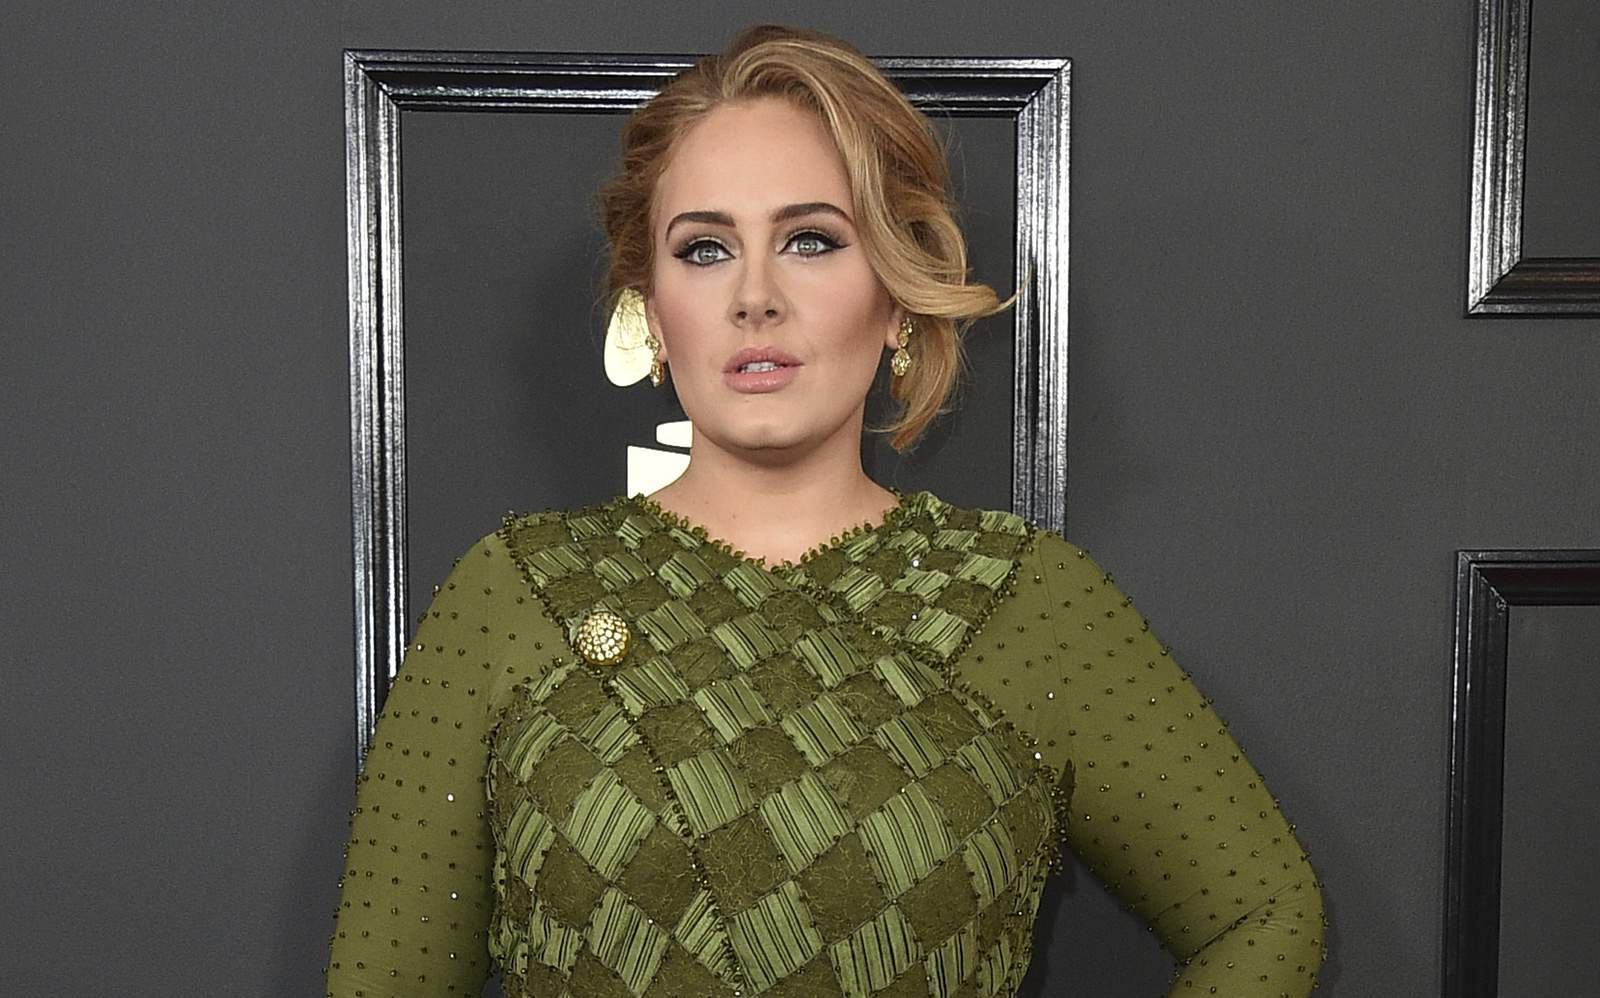 Joint custody of son, no spousal support in Adele divorce